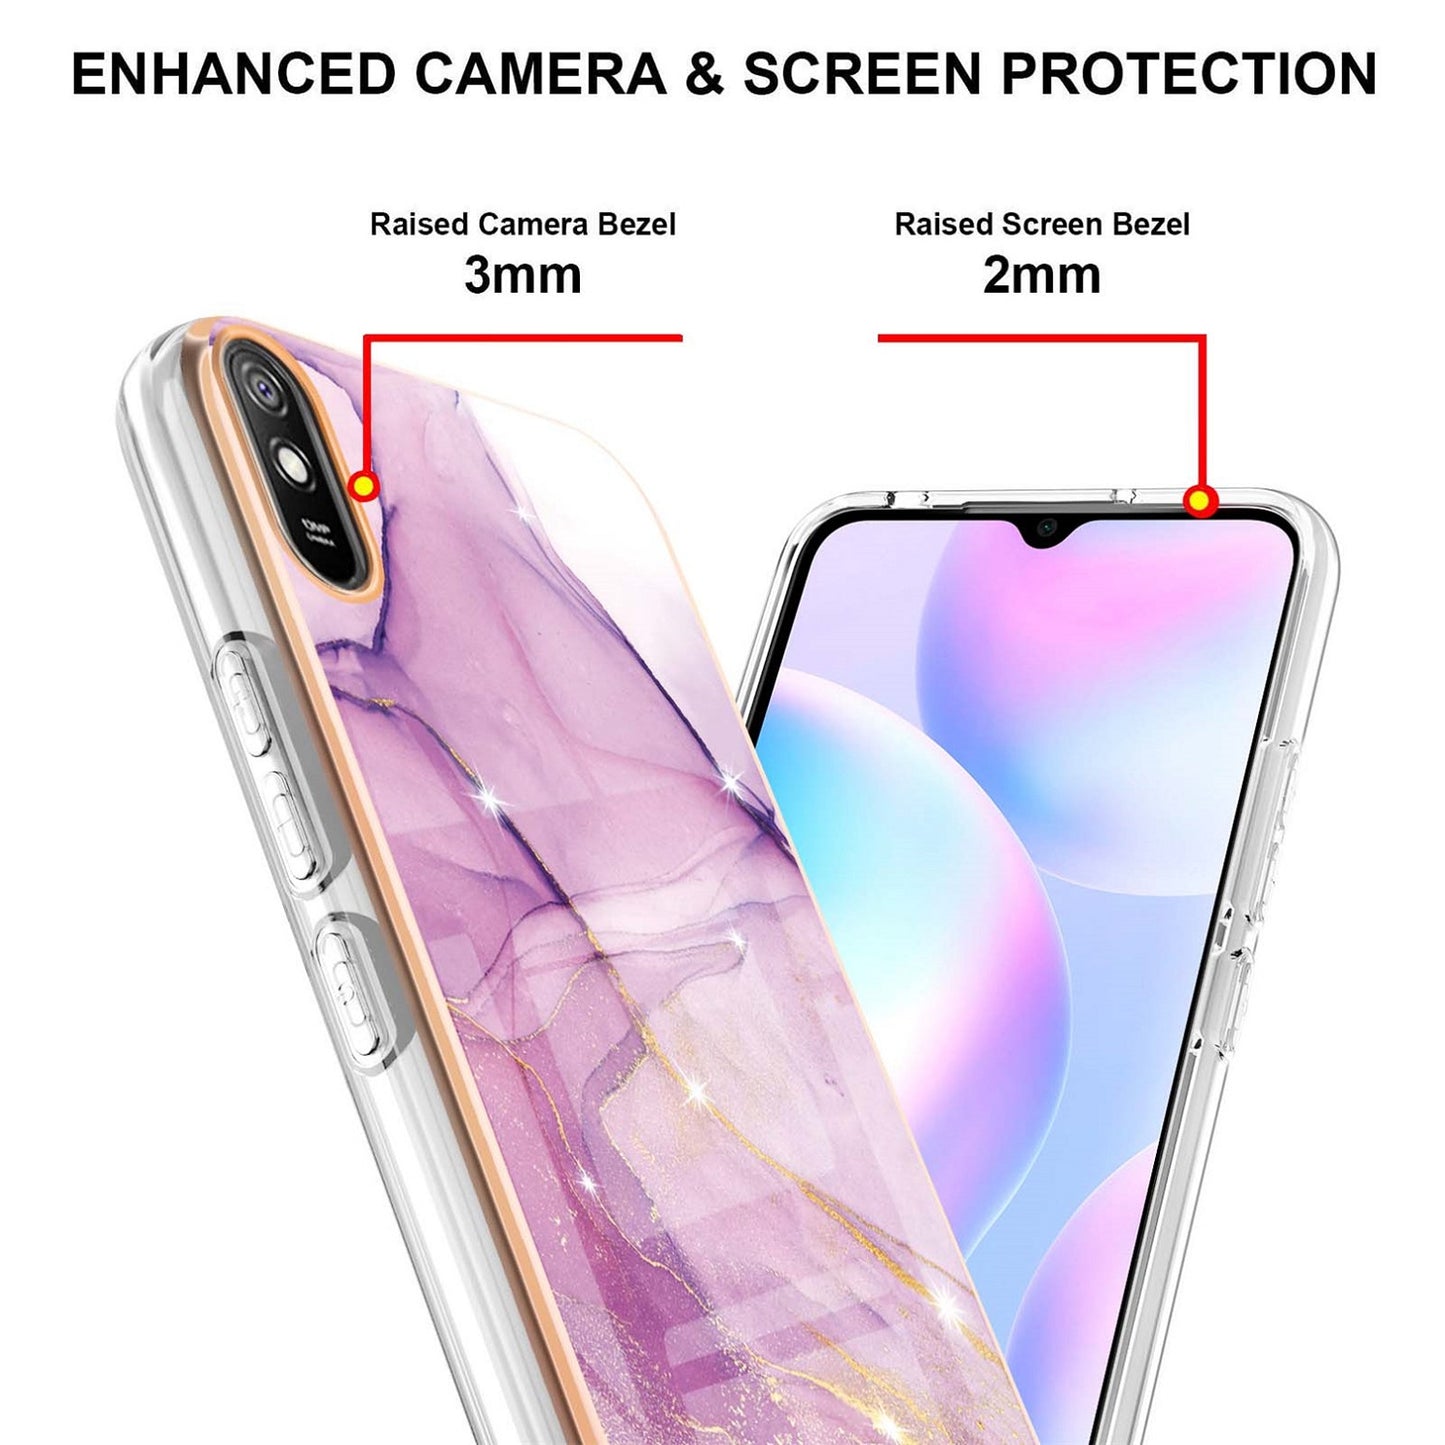 Elegant Redmi 9A back cases and covers (Marble Purple)